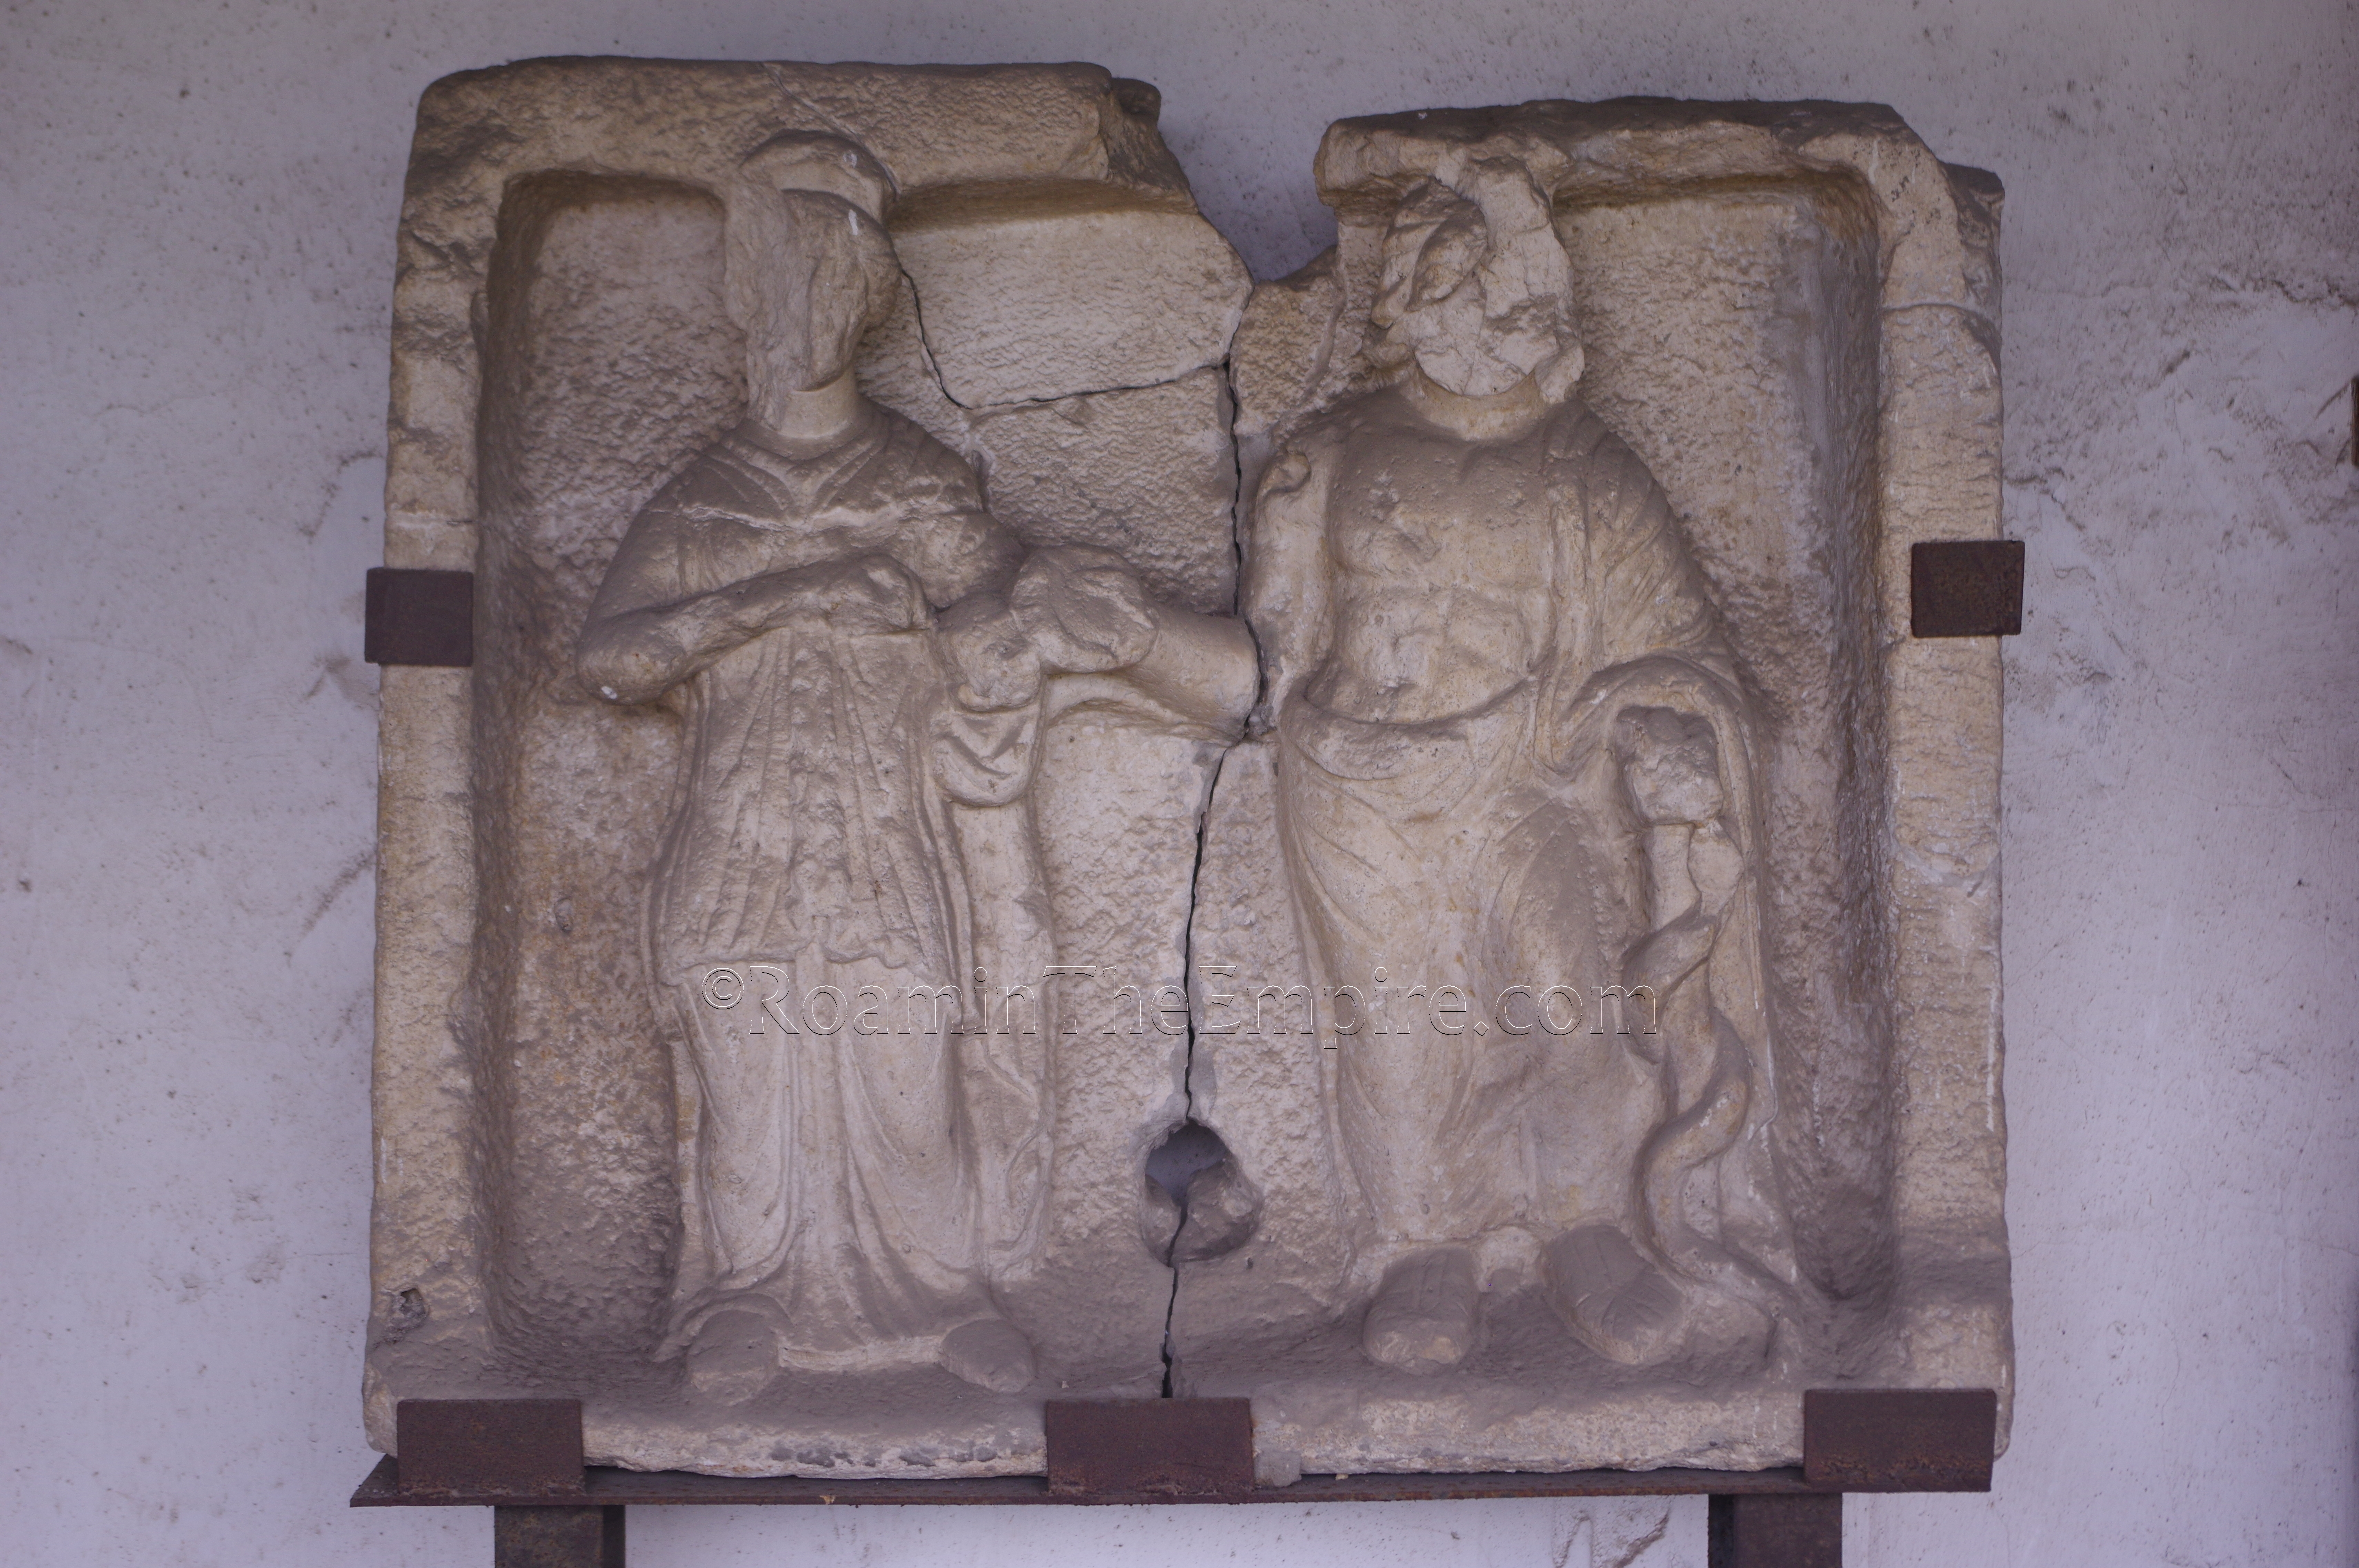 Relief depicting Aclepius and Hygeia from the lapidarium on the east side of Aquincum.